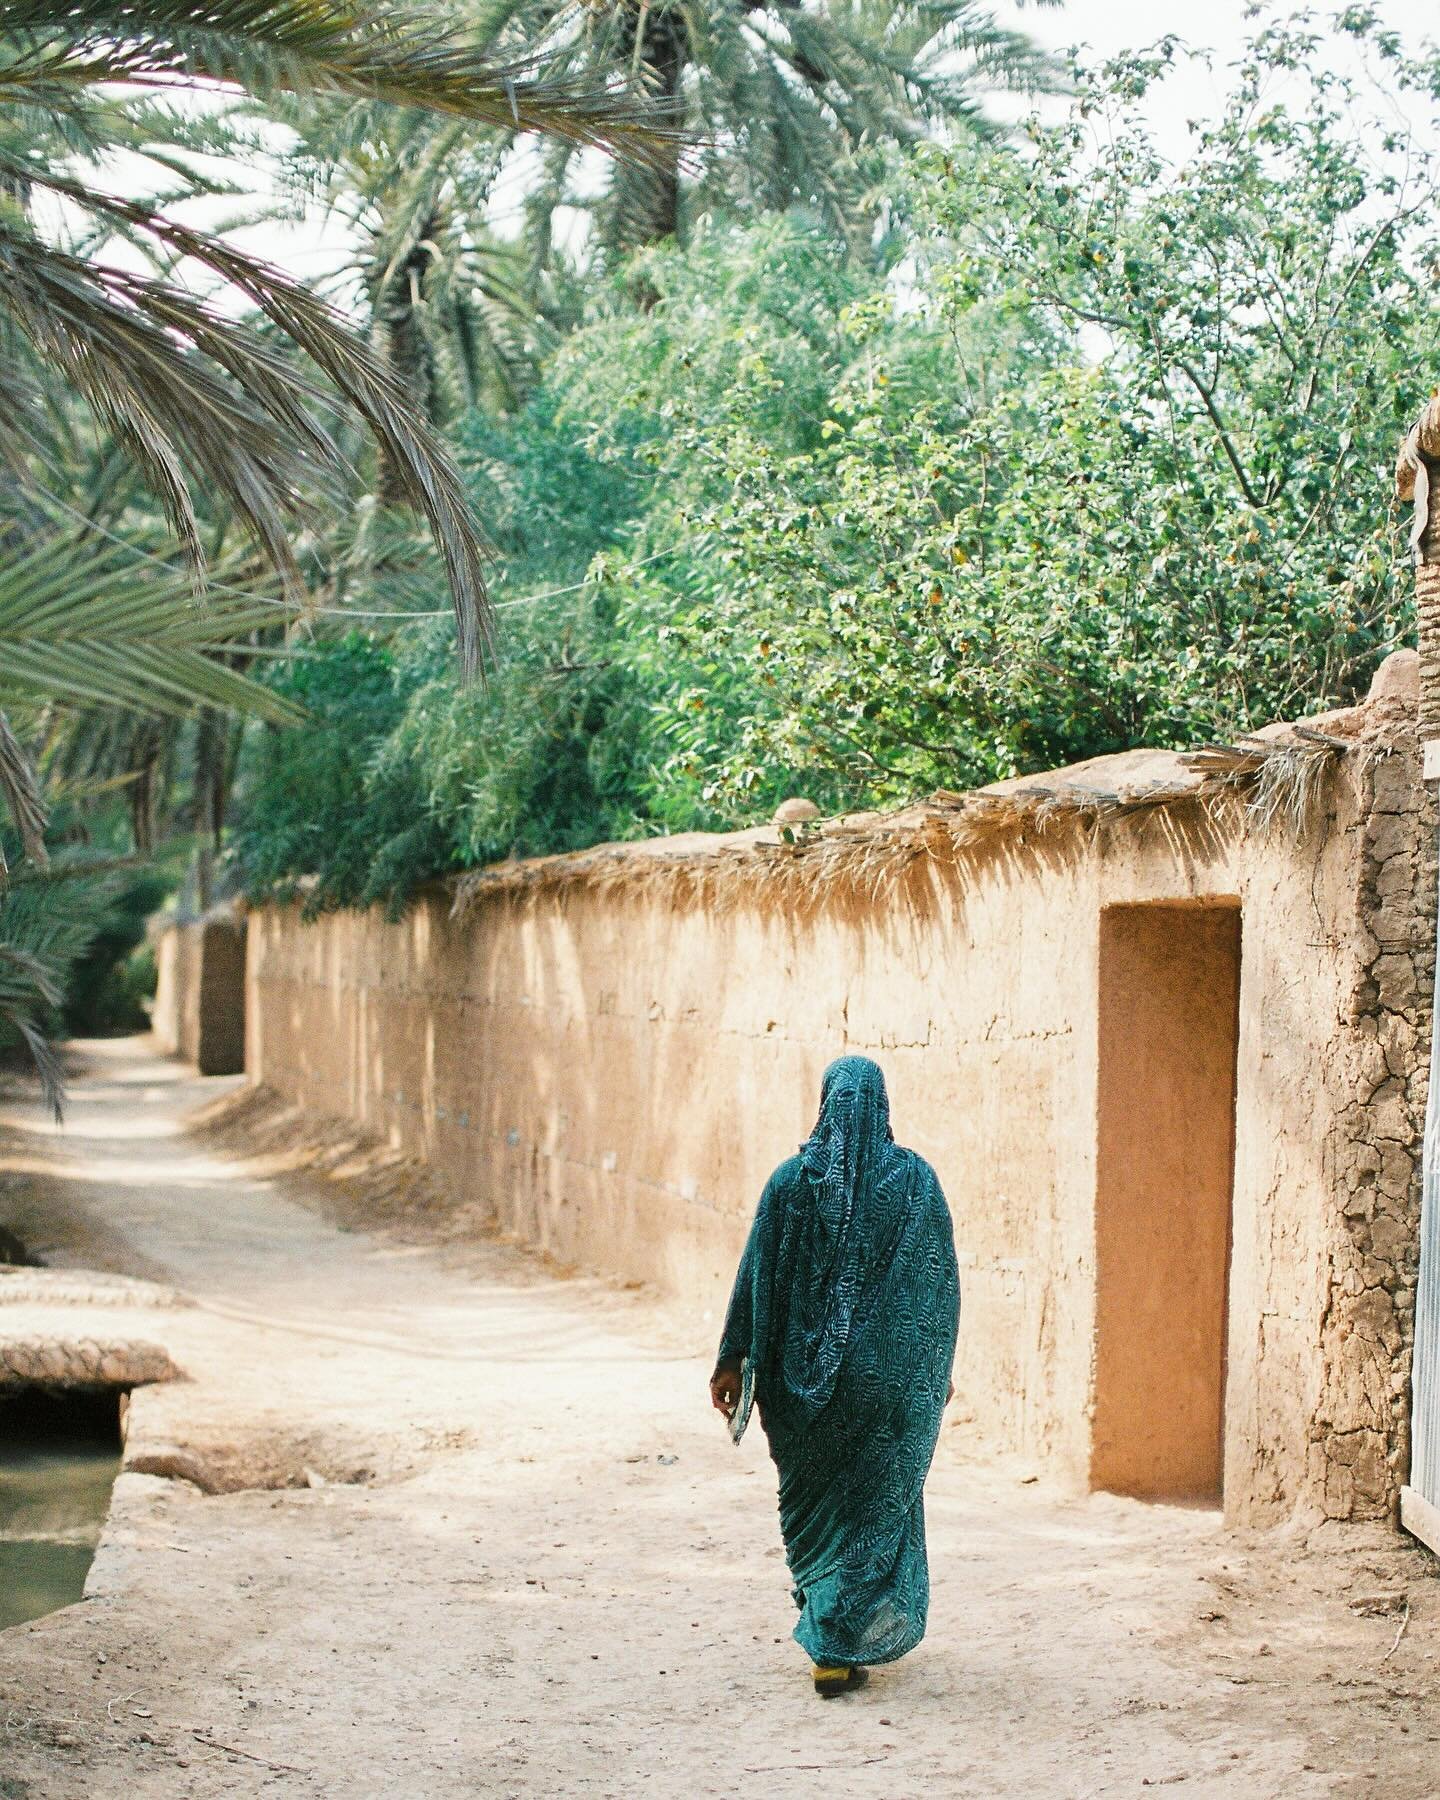 The oases are true havens for the soul, where the beauty of life flourishes even in the most arid environments. Every swaying leaf and every drop of water reflect the perfect harmony between life and earth. #oasislife #luxuryexperience #morocco #film